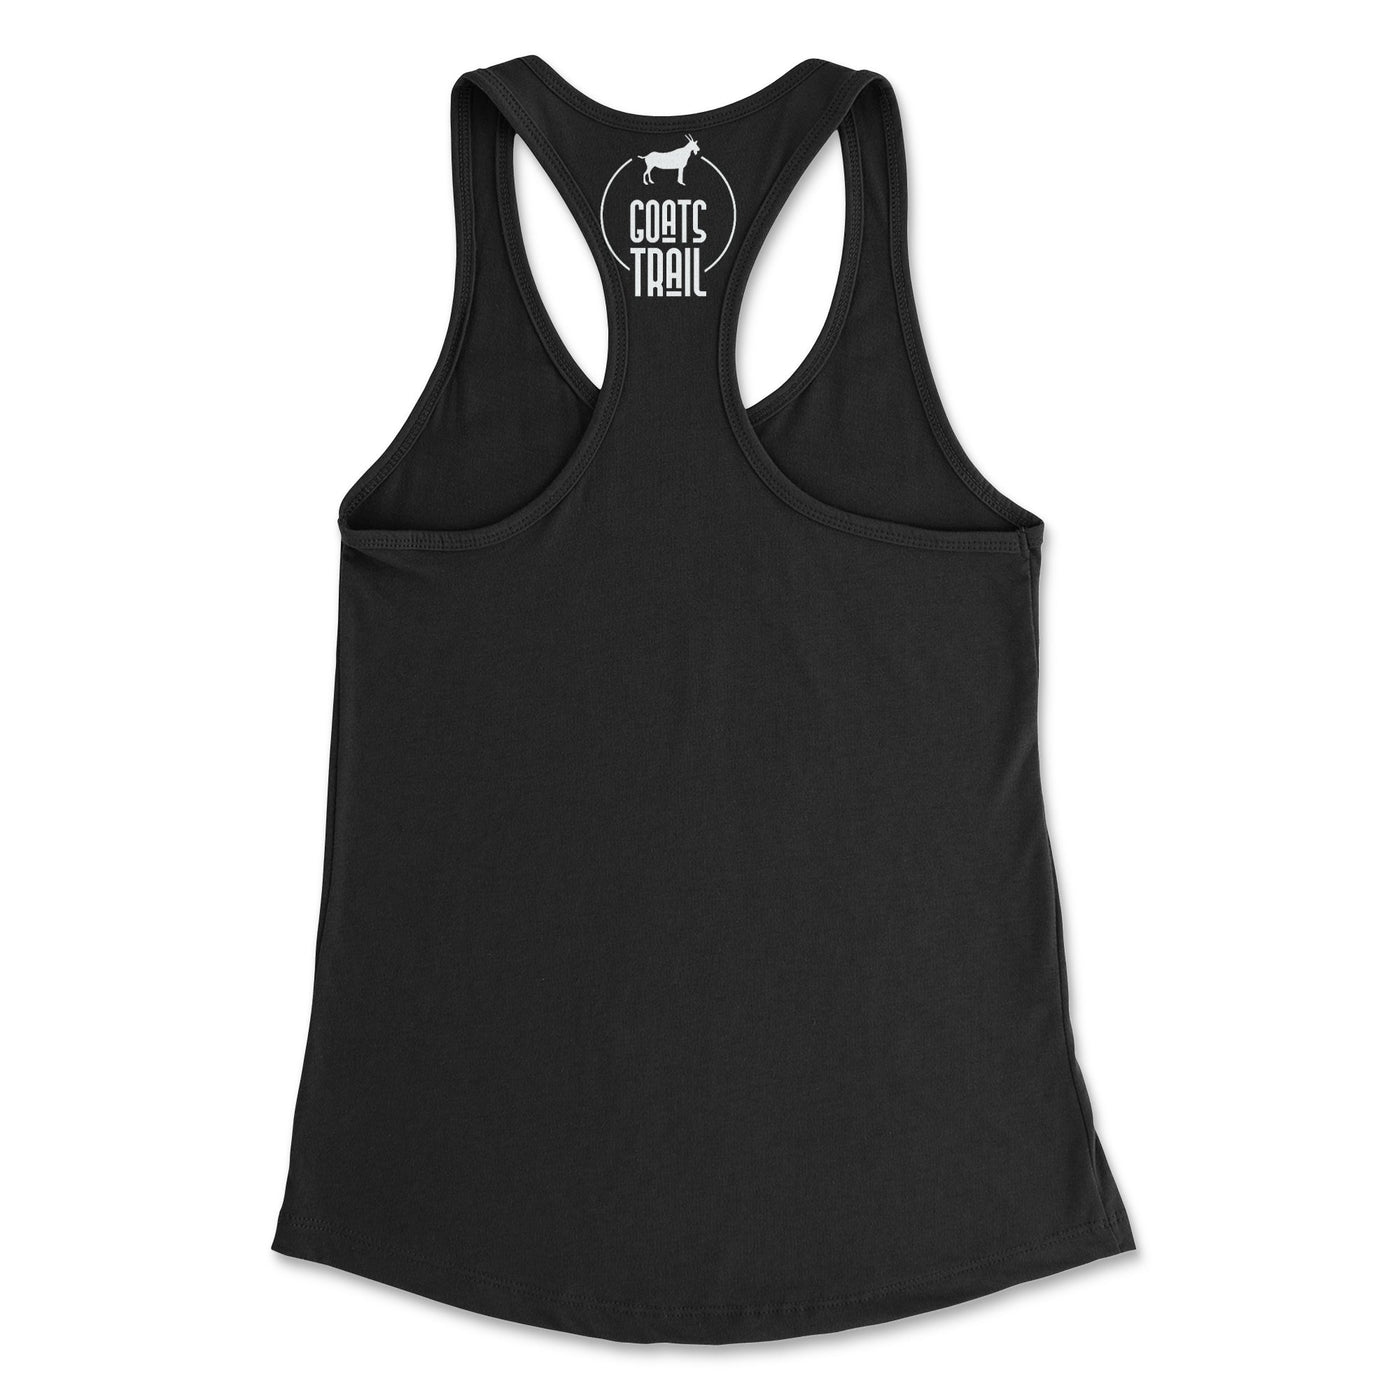 Women's Adventure is Calling, Will You Answer? Tank Top - Goats Trail Off-Road Apparel Company